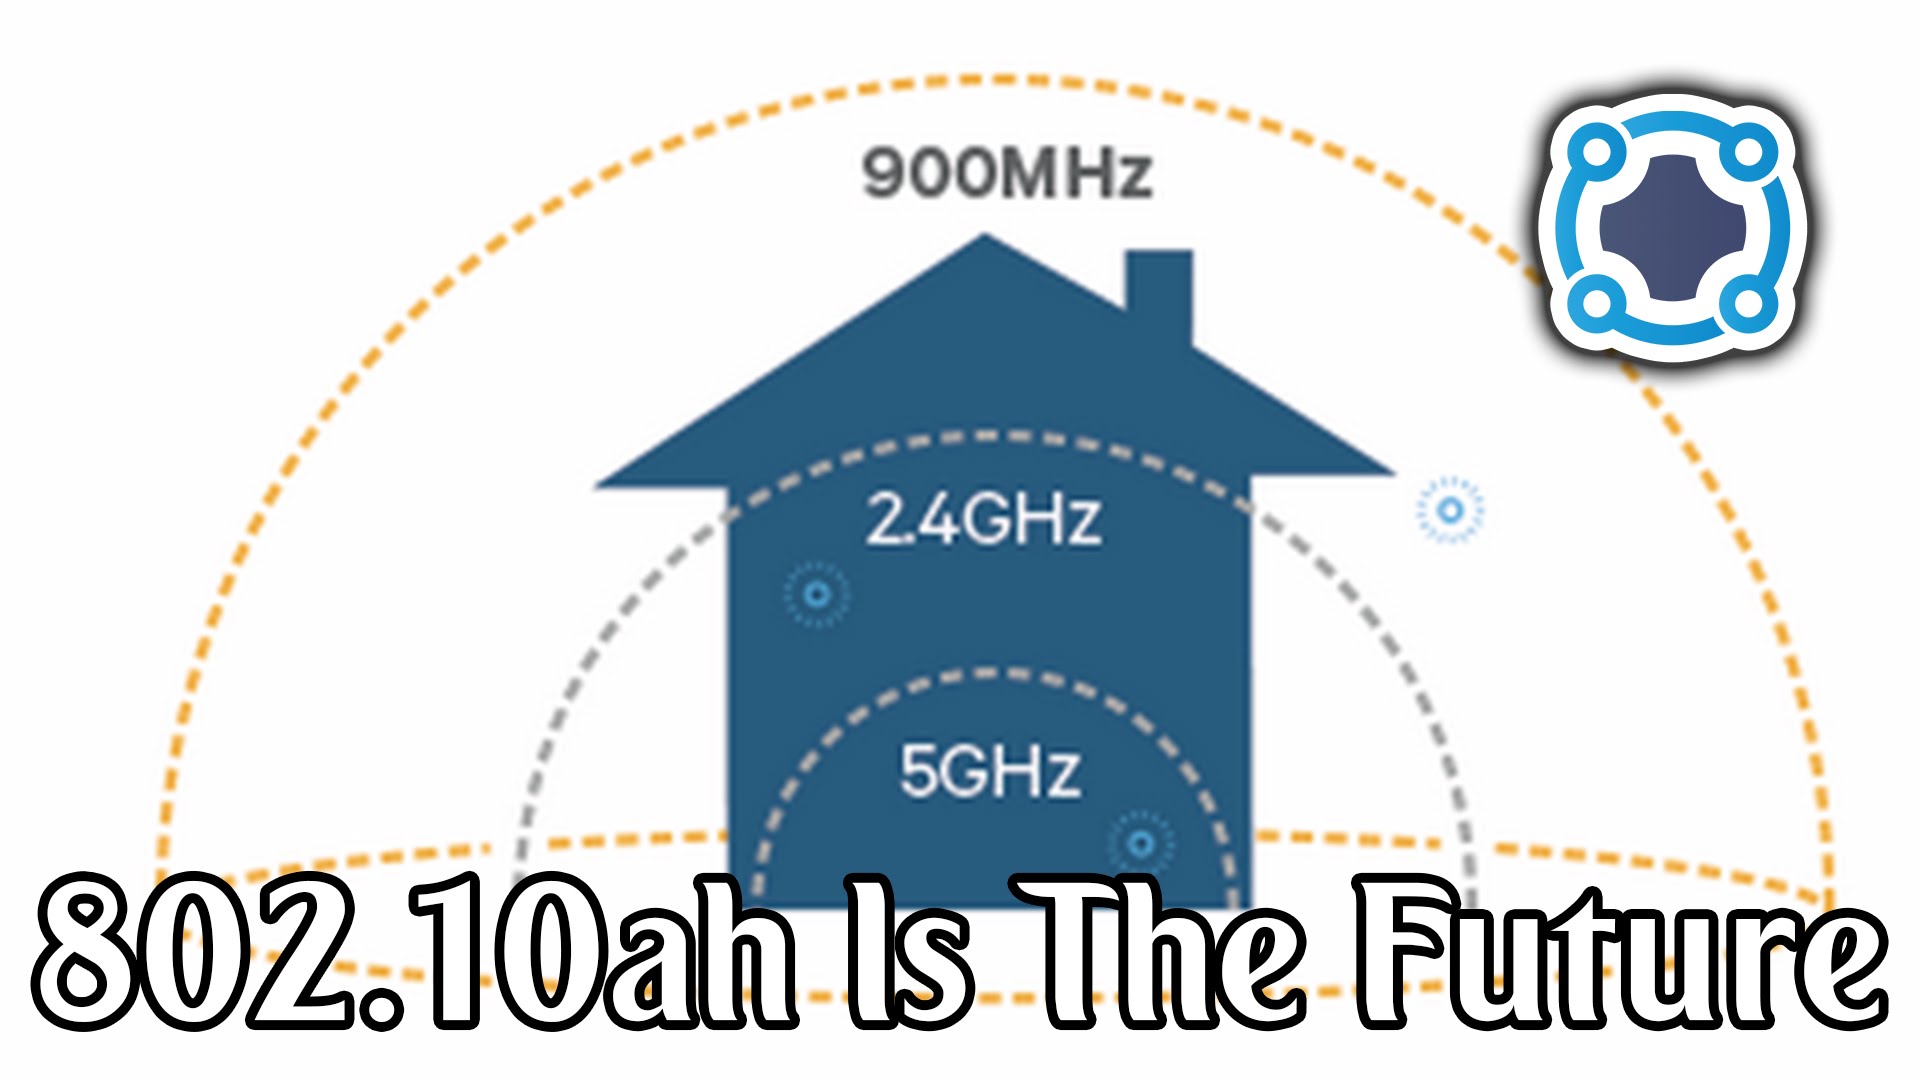 WiFi 802.11ah Will Penetrate Walls Easily With Less Power